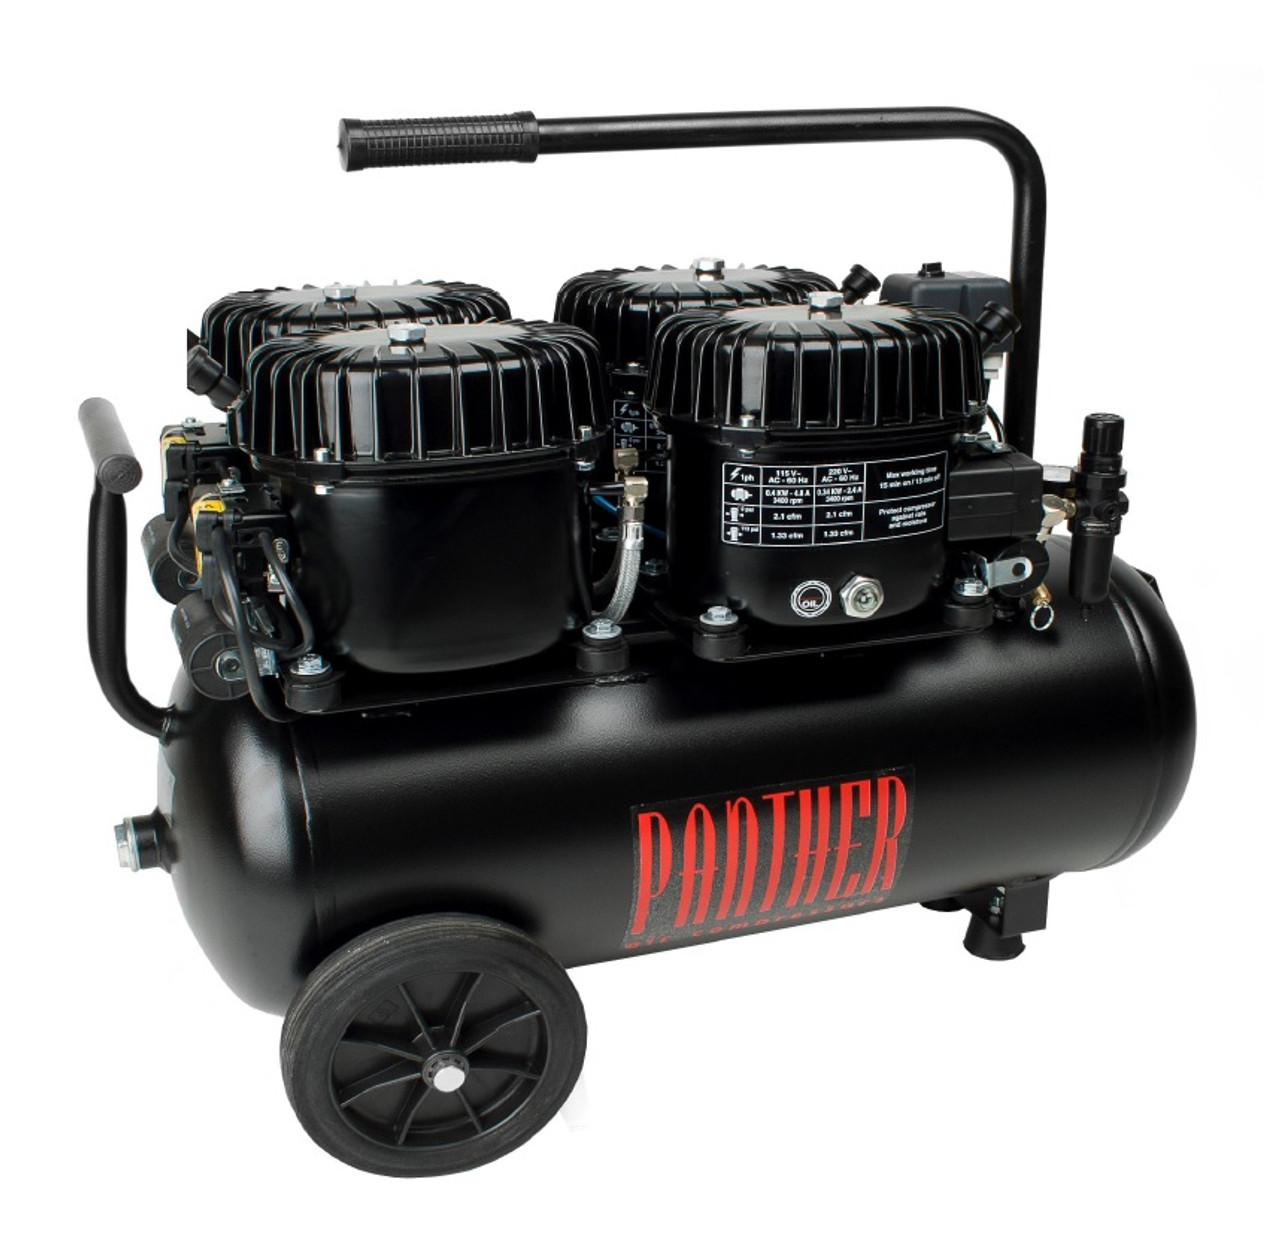 Panther Silent Air Compressor Oil